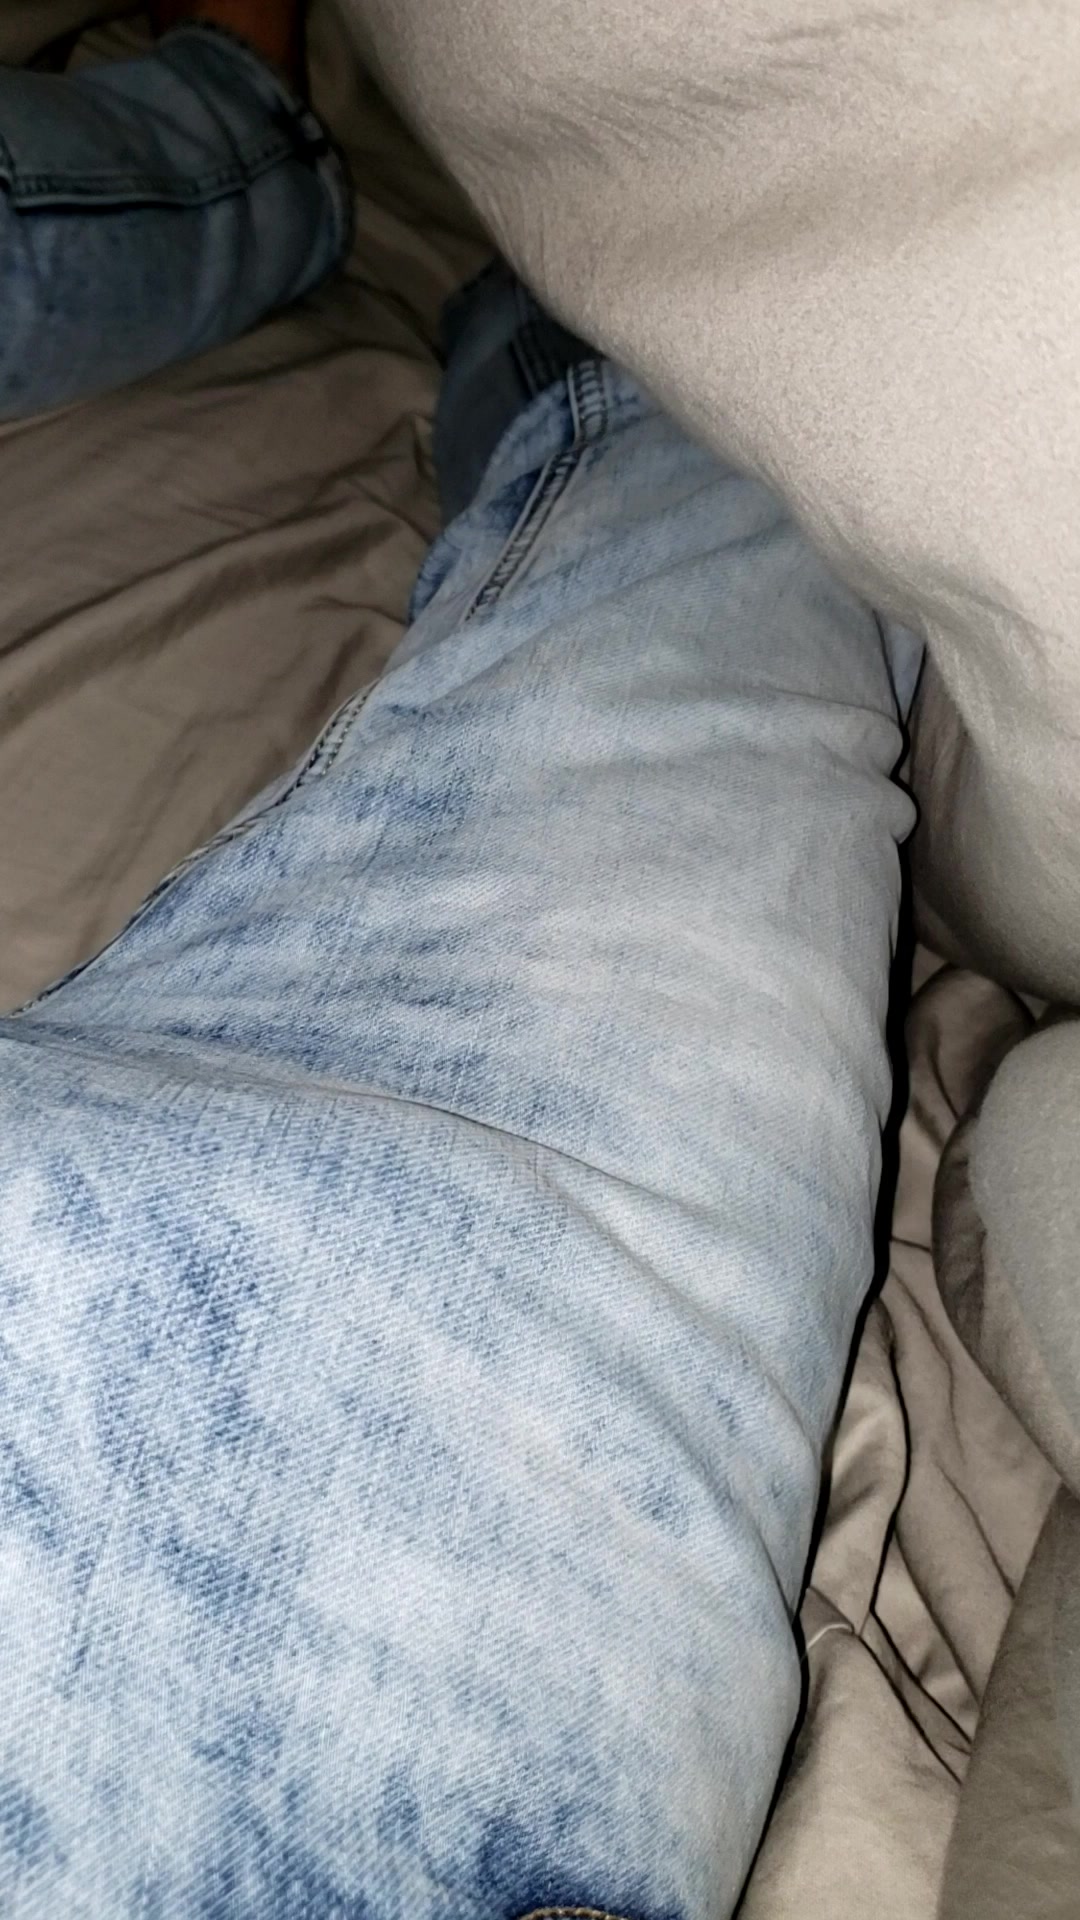 Pissing my Jean's before going to bed